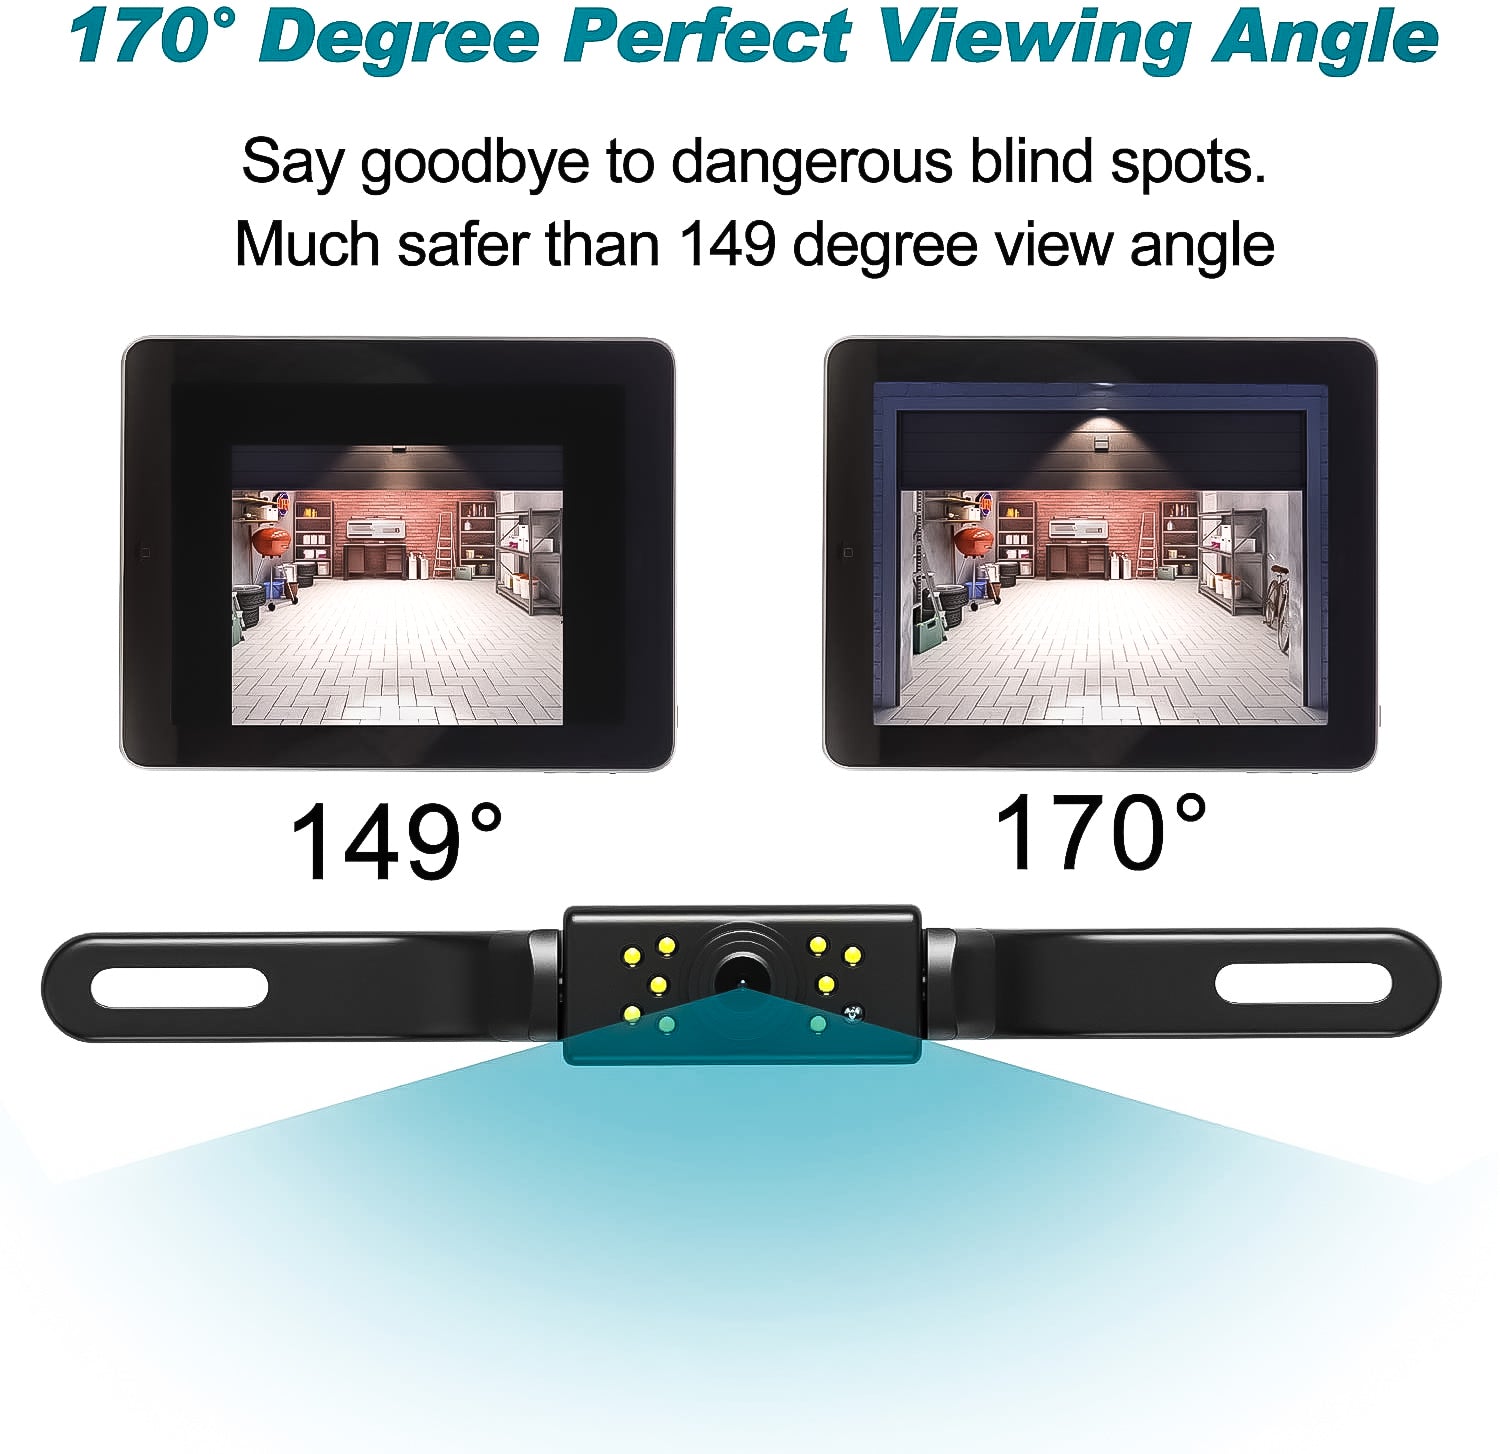 Car Rear View  Universal Vehicle Reversing Backup Camera System for RV, Truck, Bus.